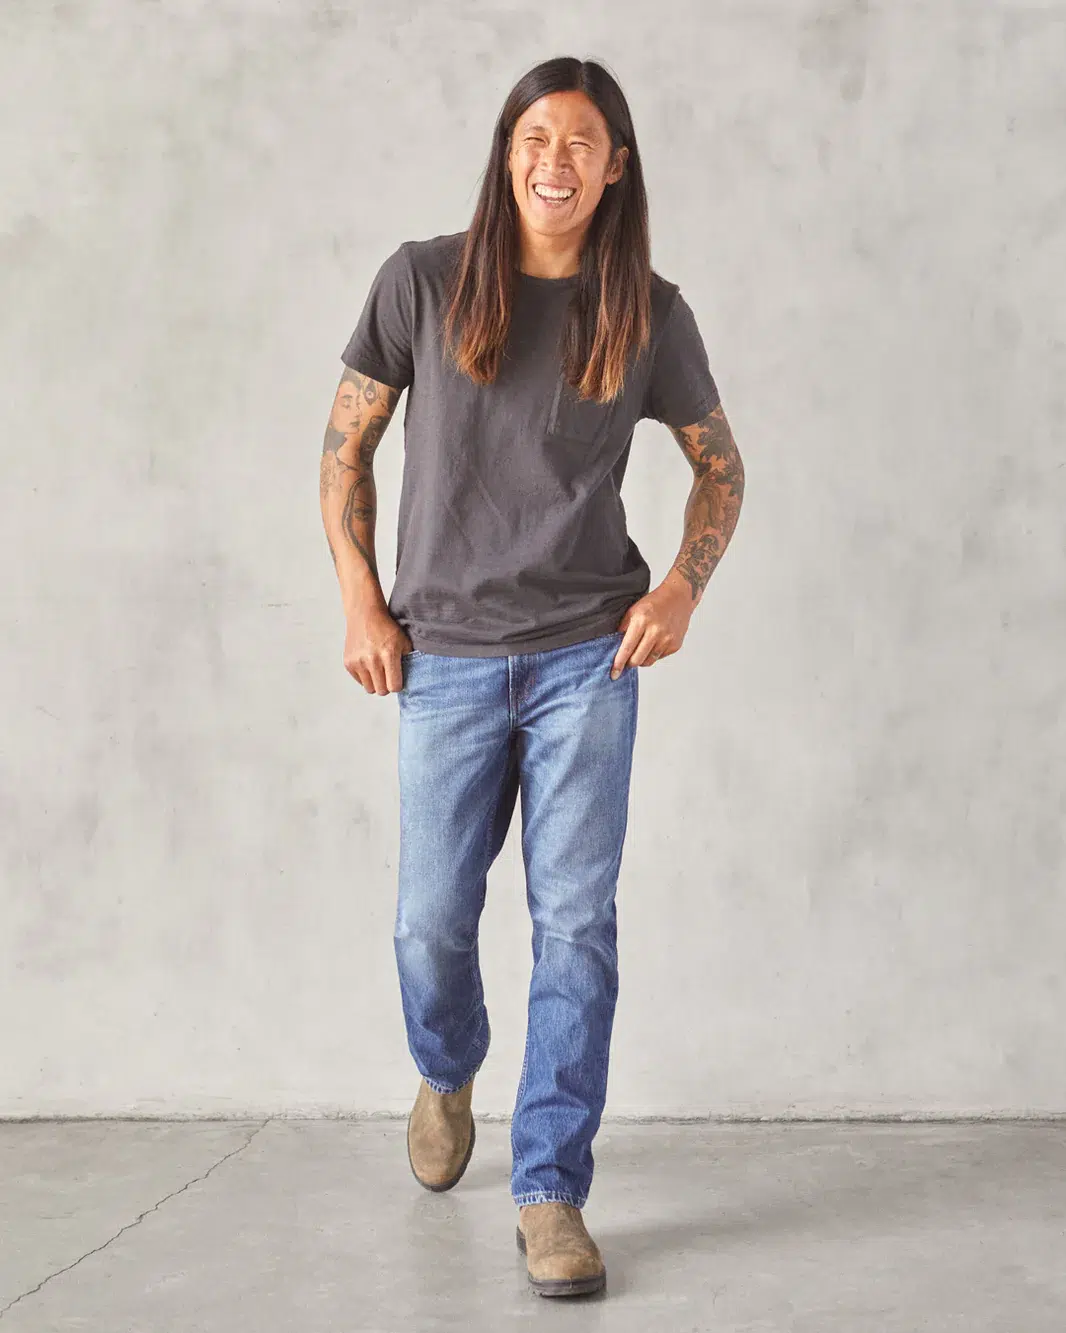 A person with long hair, wearing a dark t-shirt, blue jeans, and brown shoes, is smiling while walking towards the camera against a gray background.